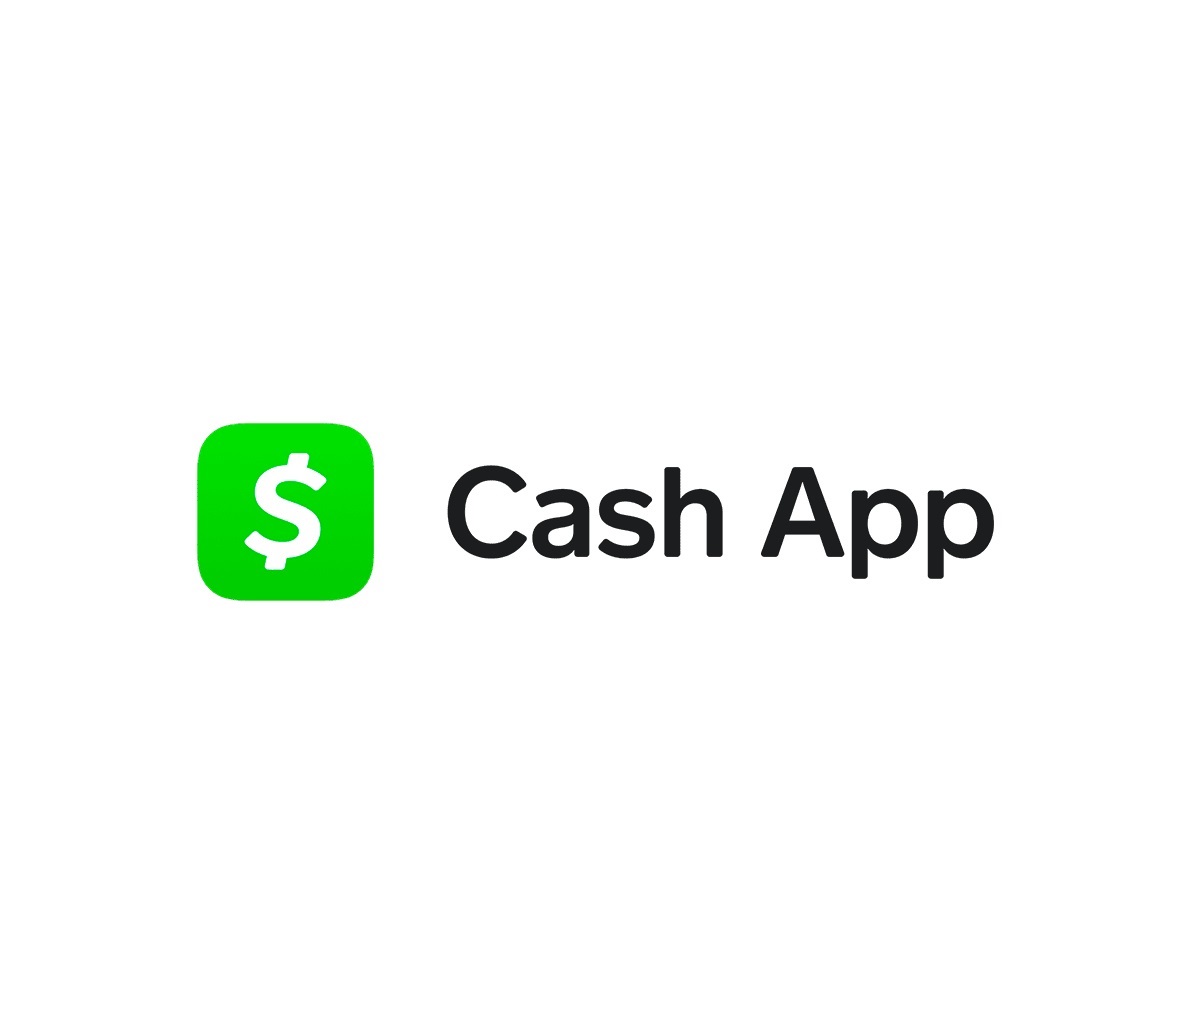 Cash App Introduces 4.5% APY For Savings Accounts With Direct Deposit